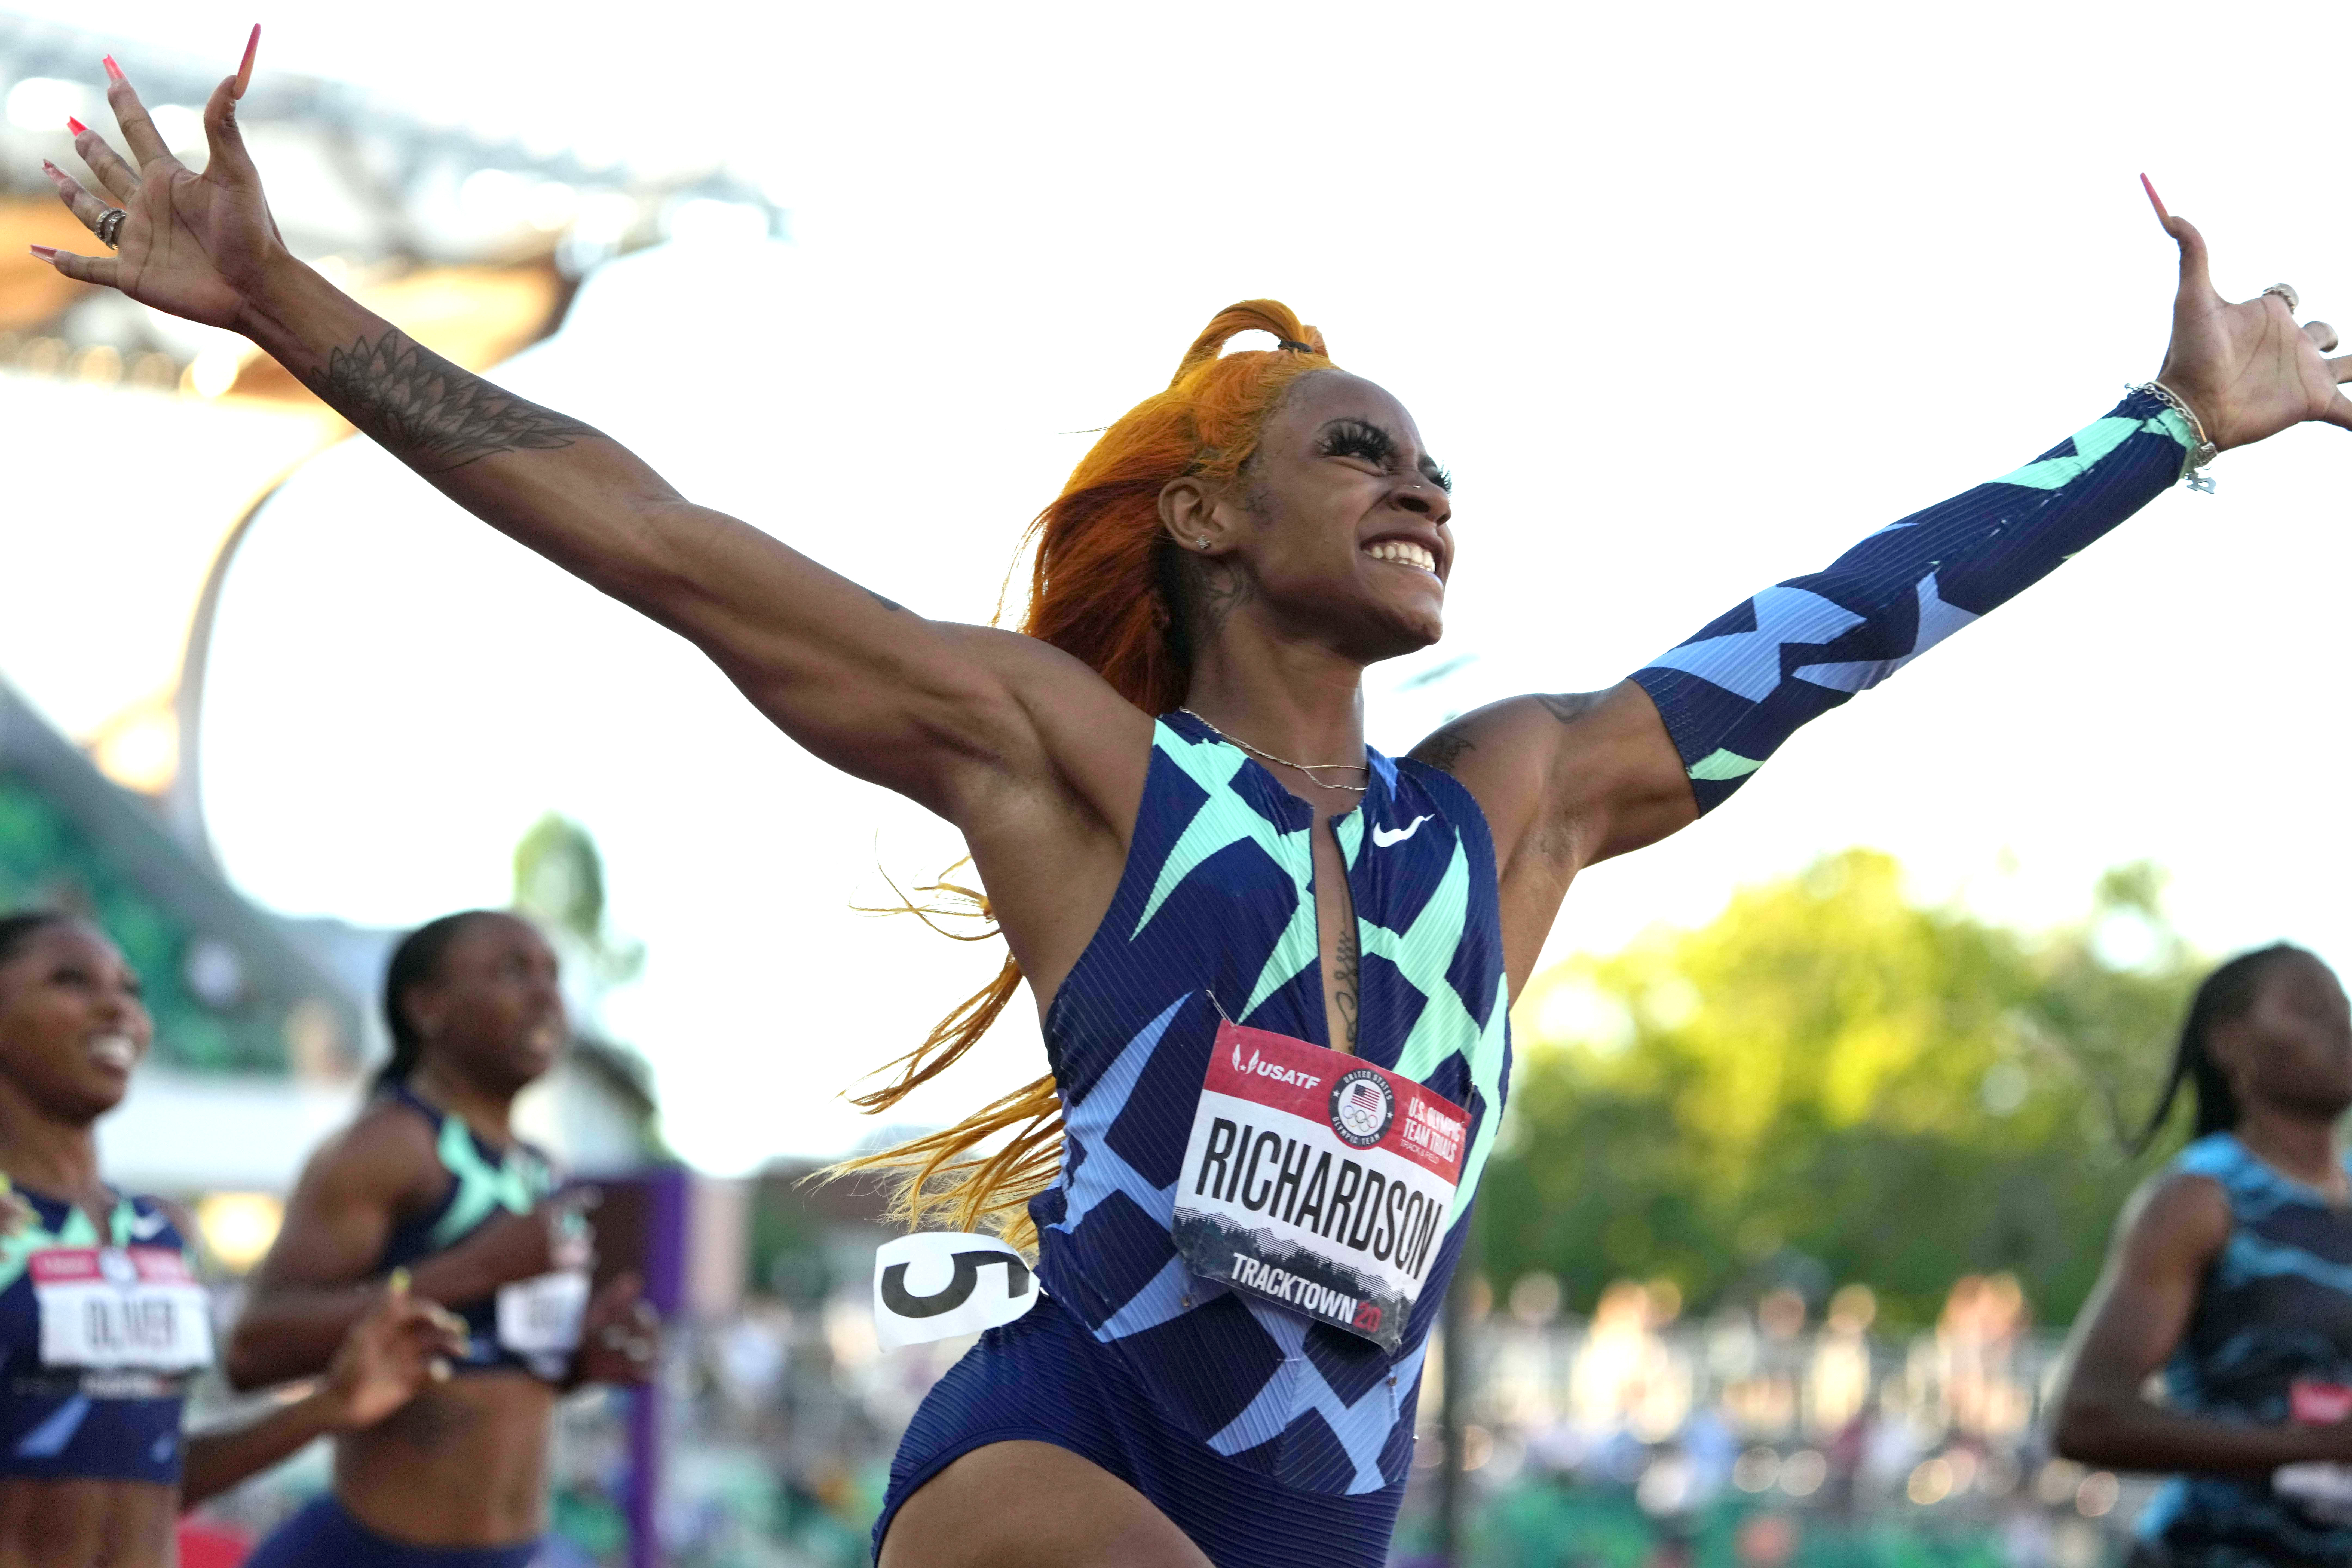 Jun 19, 2021; Eugene, OR, USA; Sha'Carri Richardson celebrates after winning the women's 100m in 10.86 during the US Olympic Team Trials at Hayward Field. Mandatory Credit: Kirby Lee-USA TODAY Sports